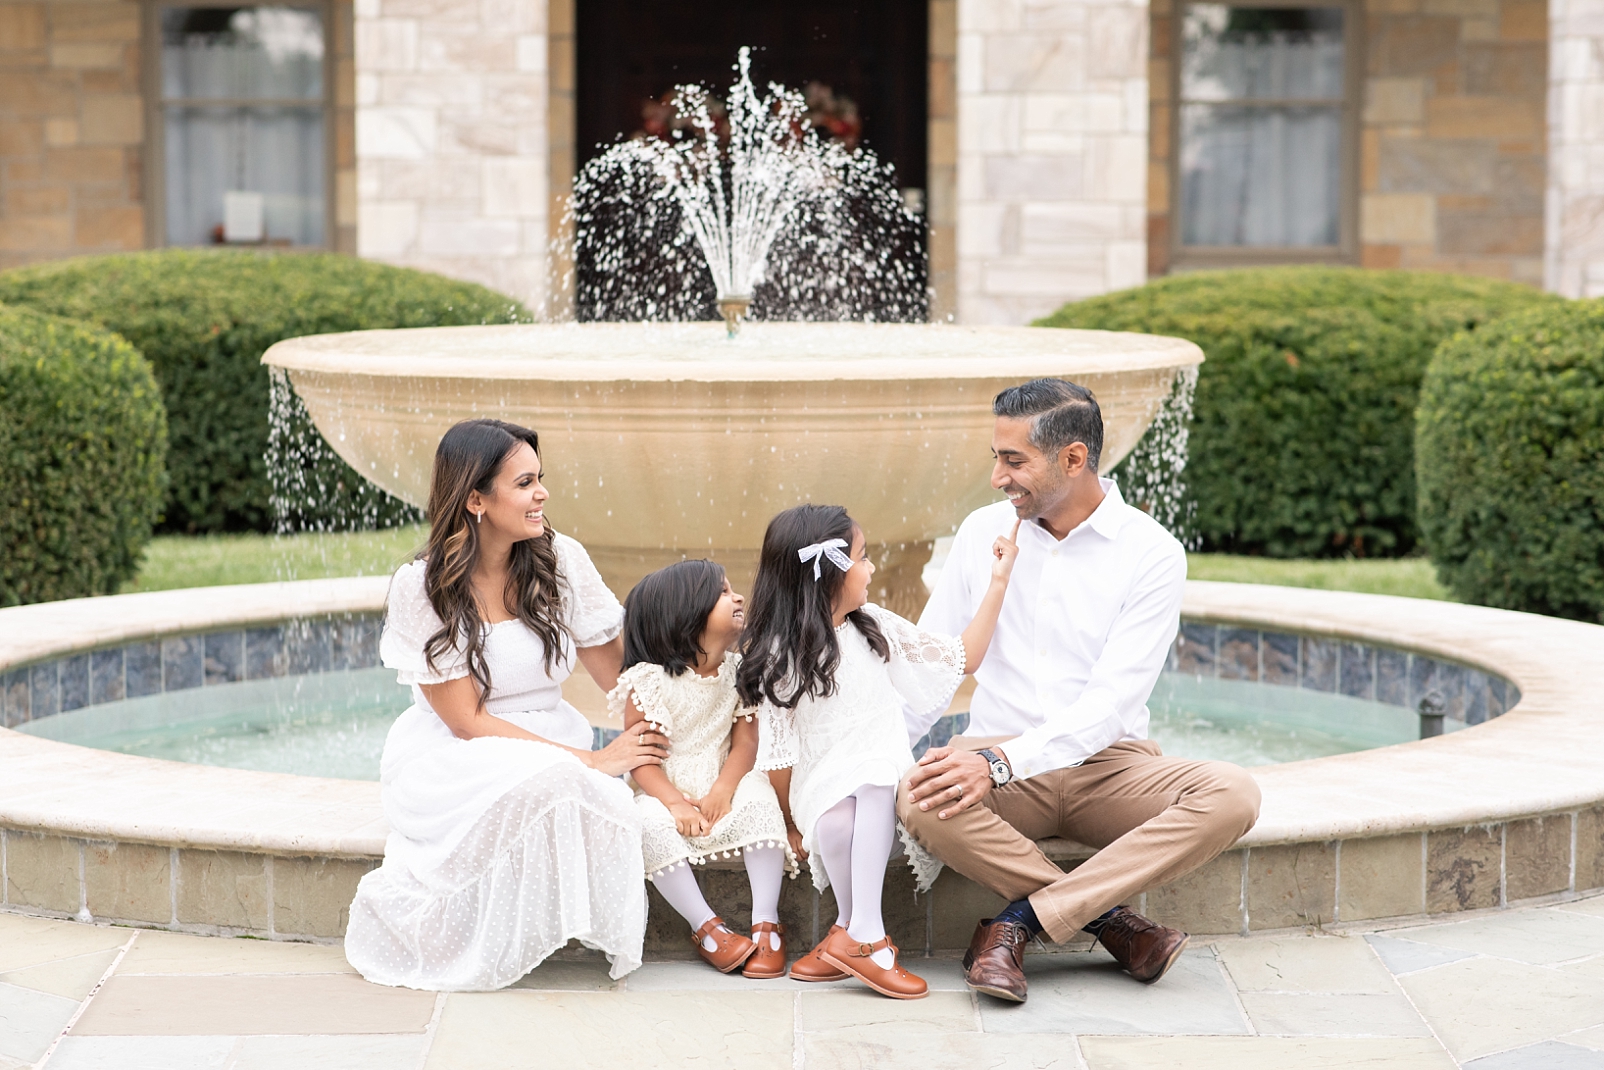 Family of 4 sitting in front of fountain